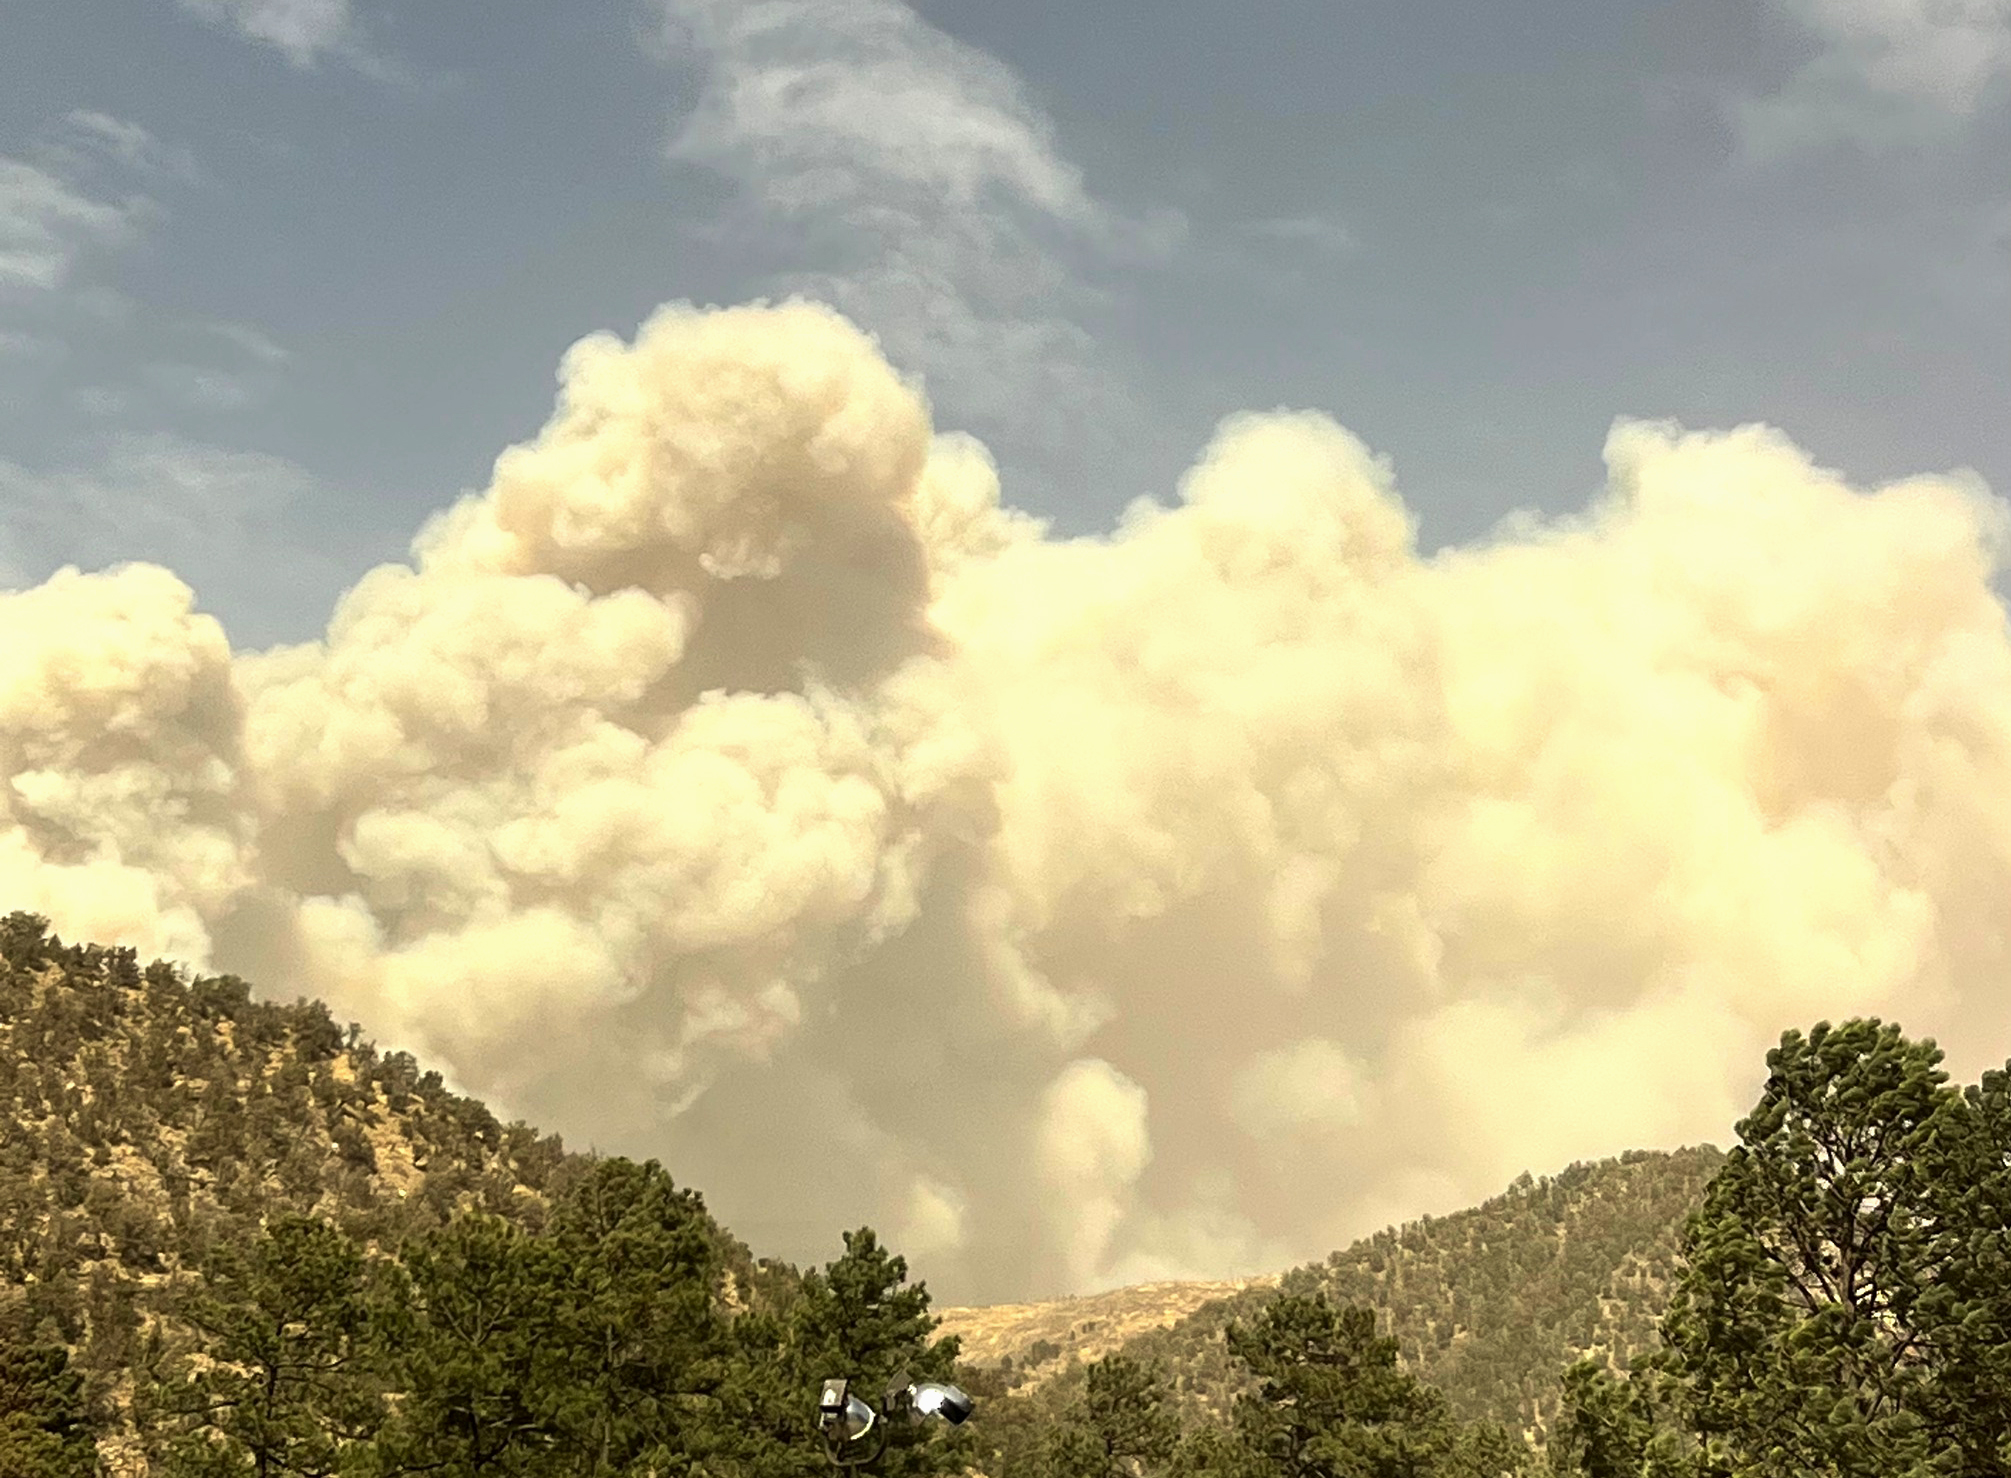 Wildfire destroys at least 150 structures in Ruidoso, New Mexico